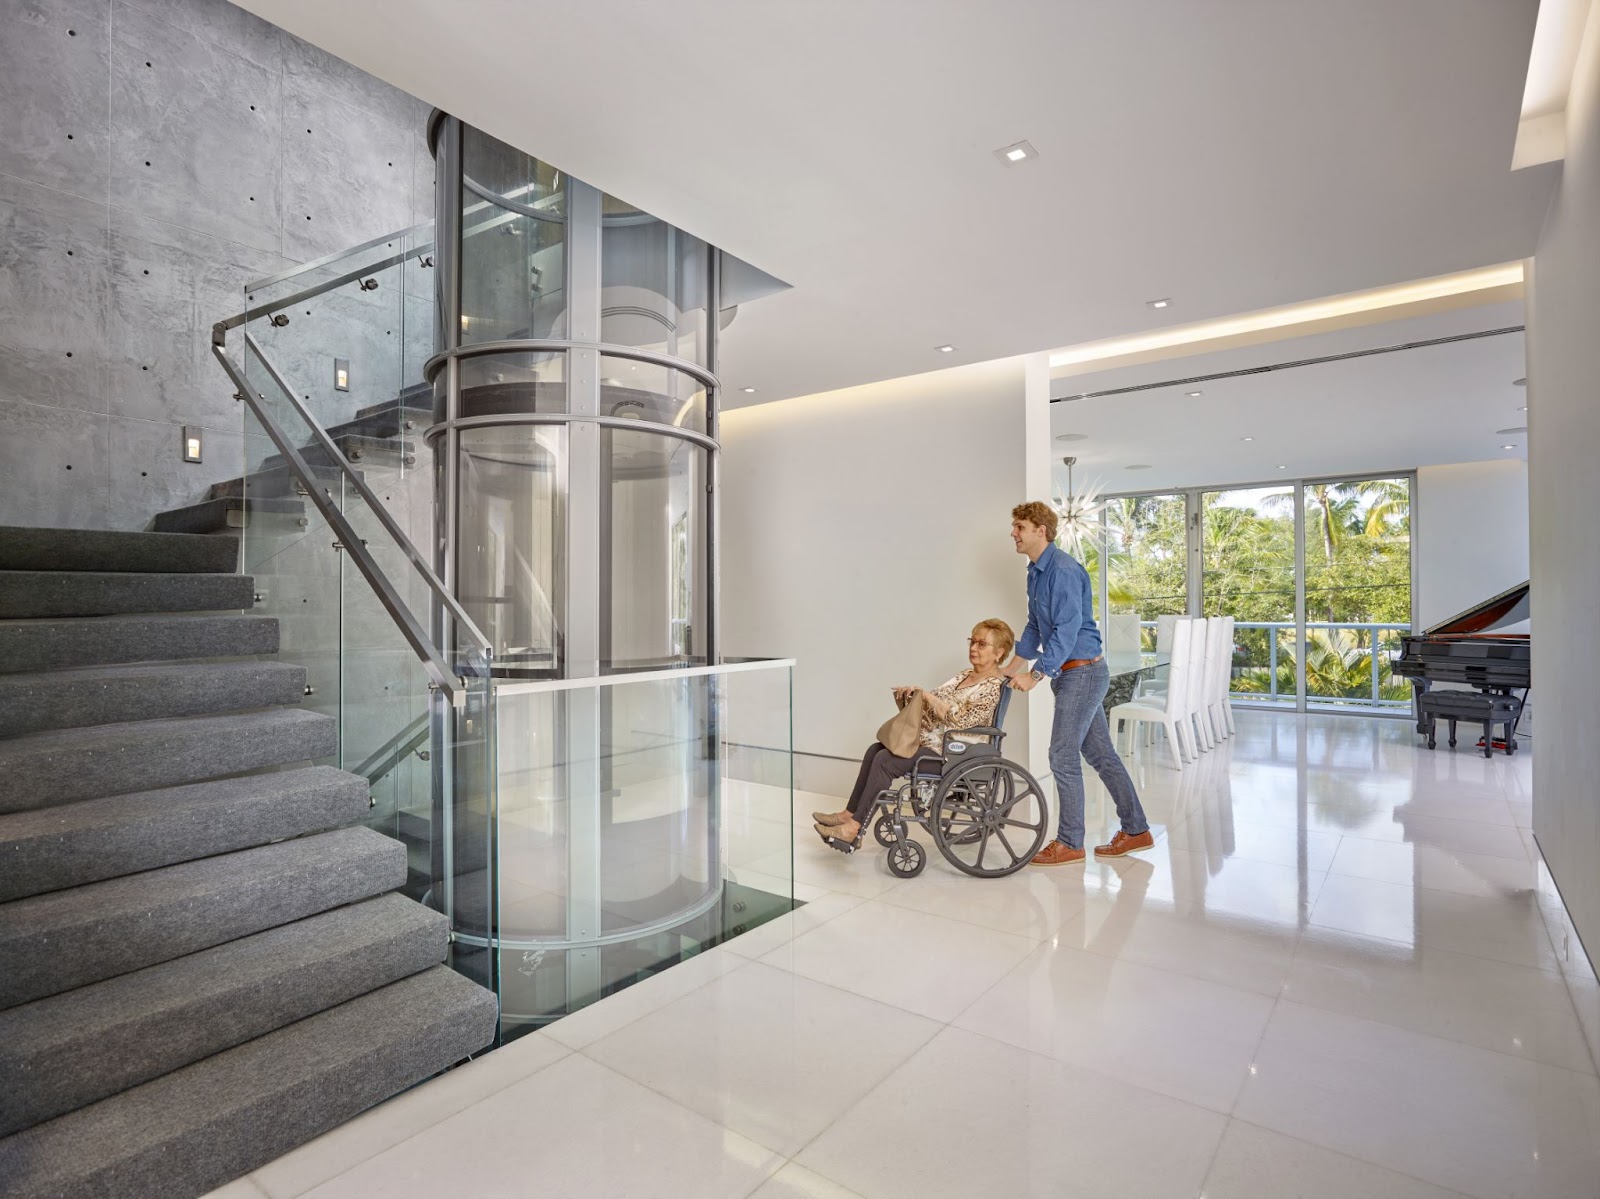 Residential Elevators are accessible for people with disabilities.